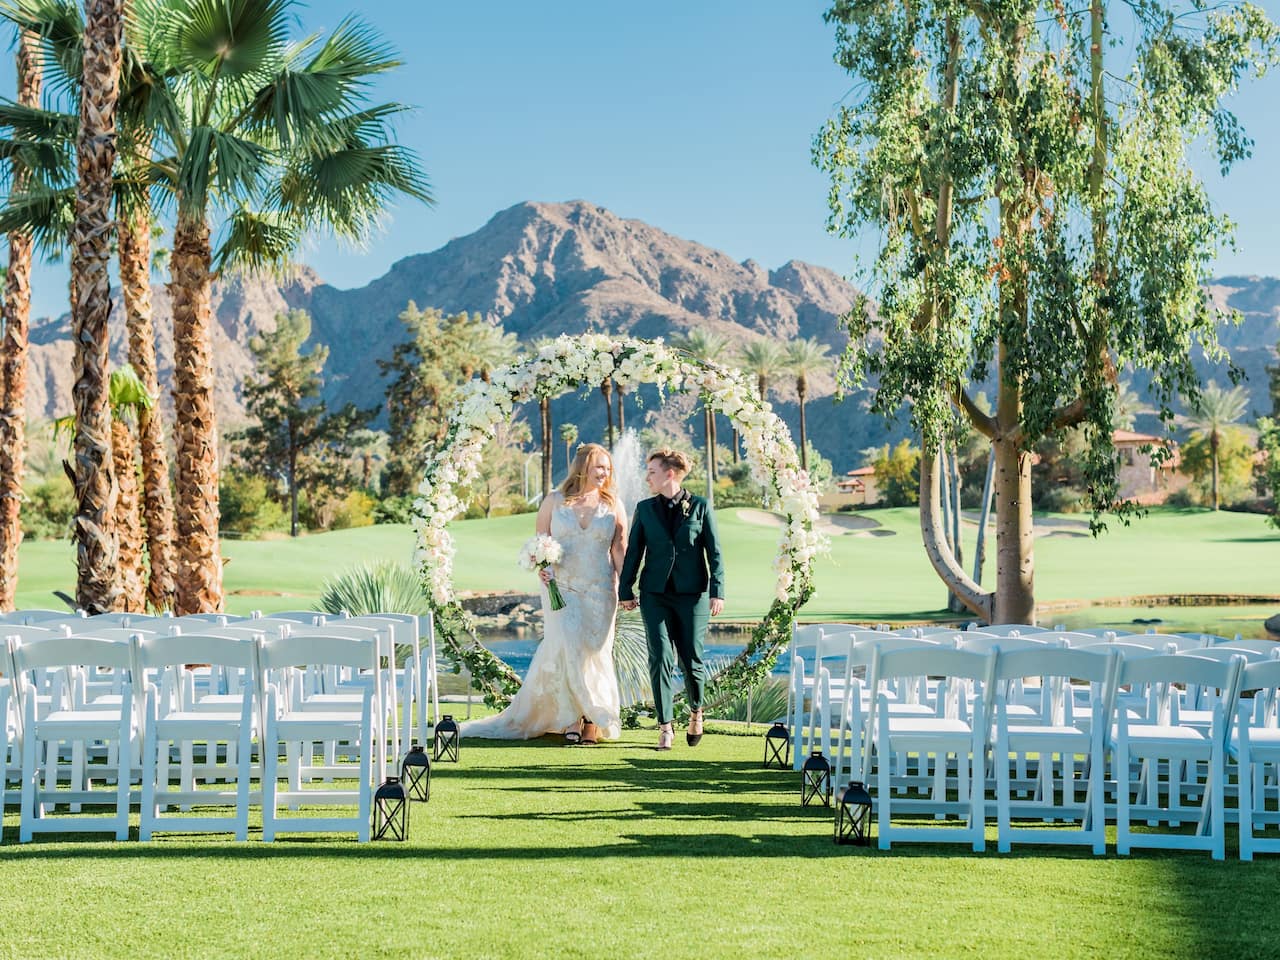 An outdoor wedding reception with white draped tables, flowers, and wine glasses in Palm Springs